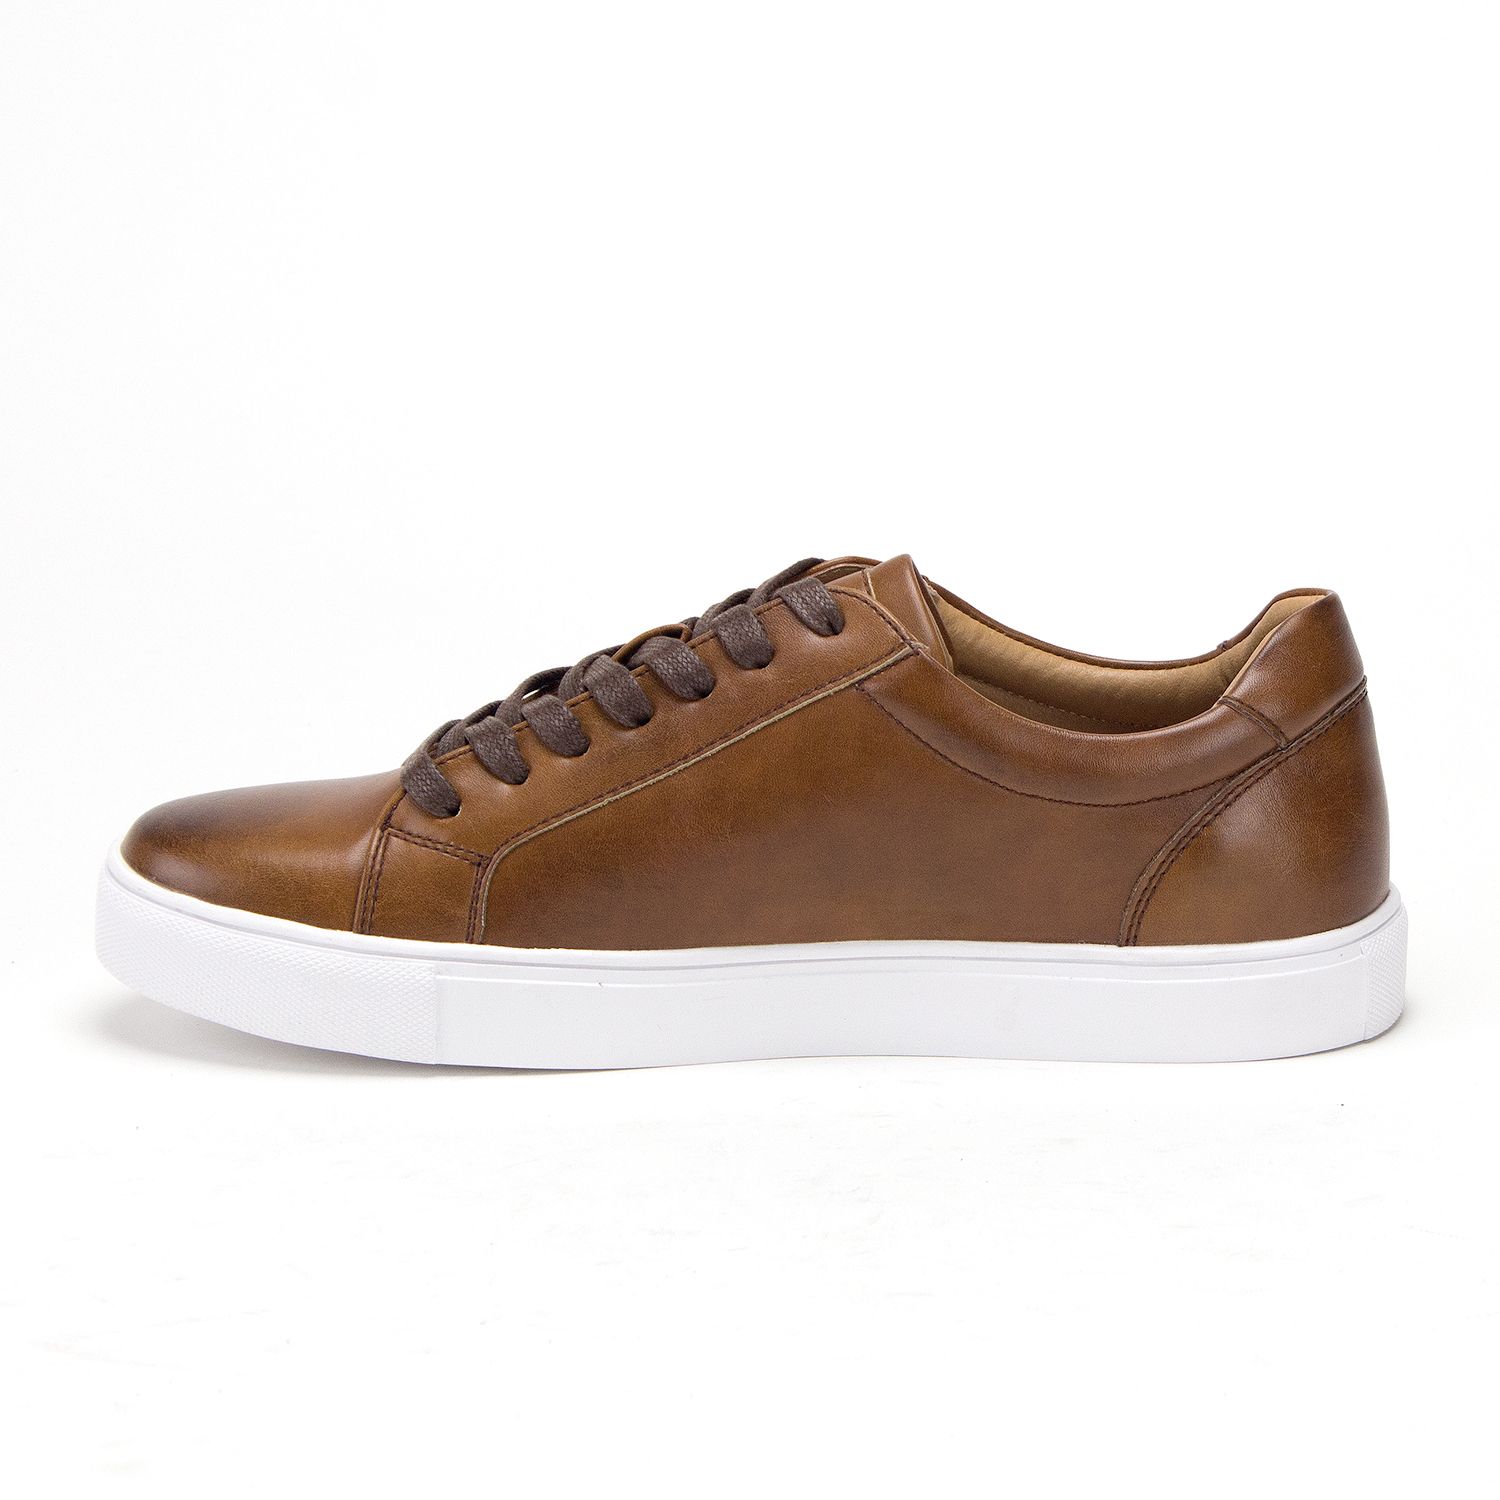 Men's S-1811 Classic Lace Up Plimsoll Skate Sneakers Shoes, Tan, 8 - image 2 of 4